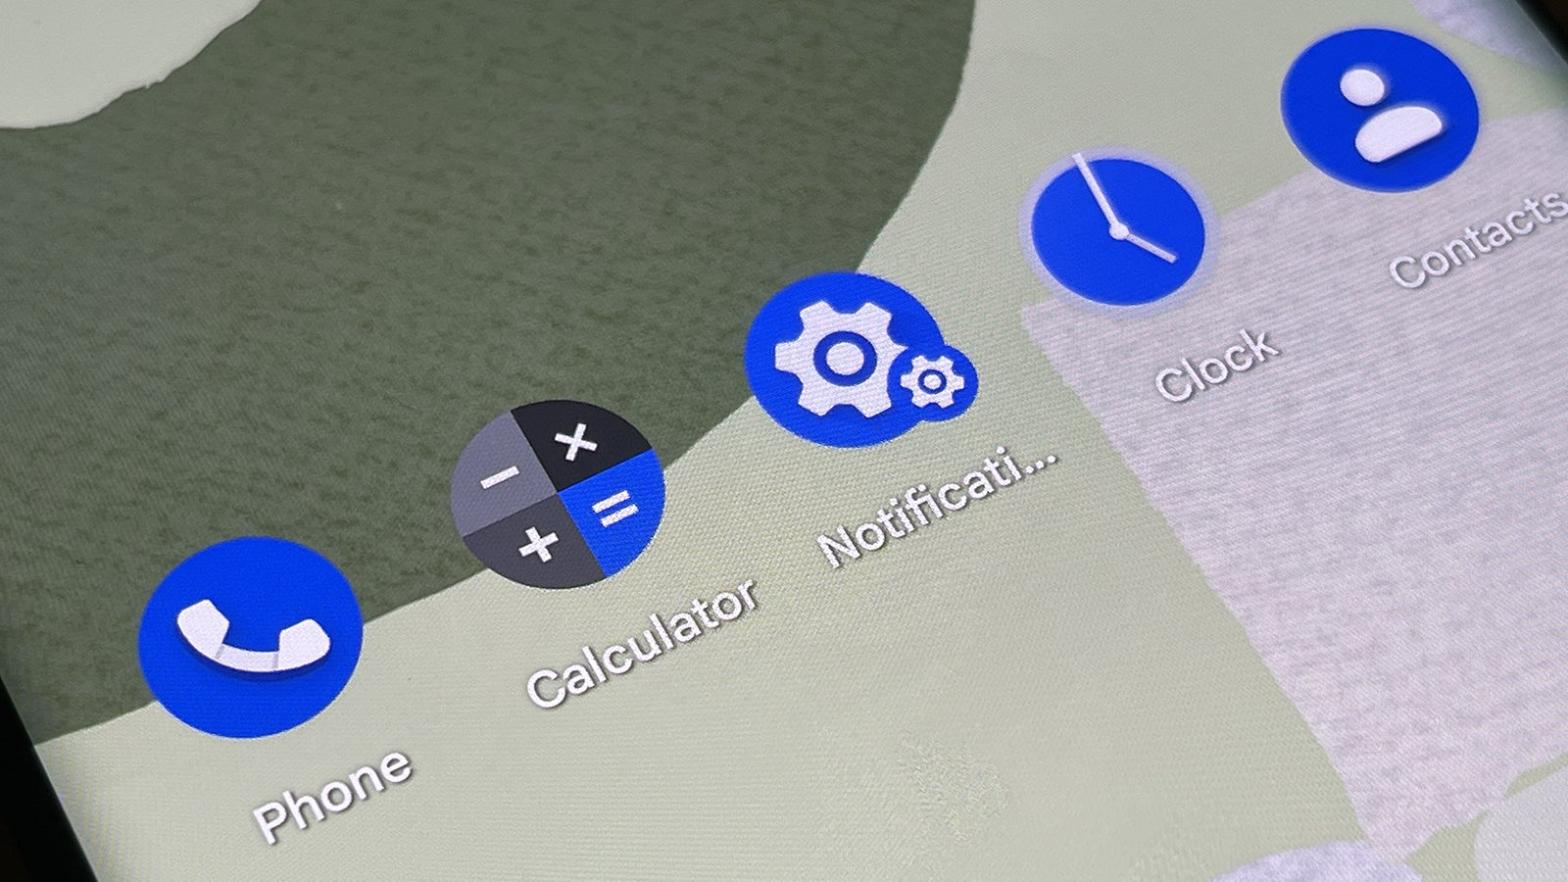 Shortcuts can live alongside apps on your home screen. (Photo: Gizmodo)